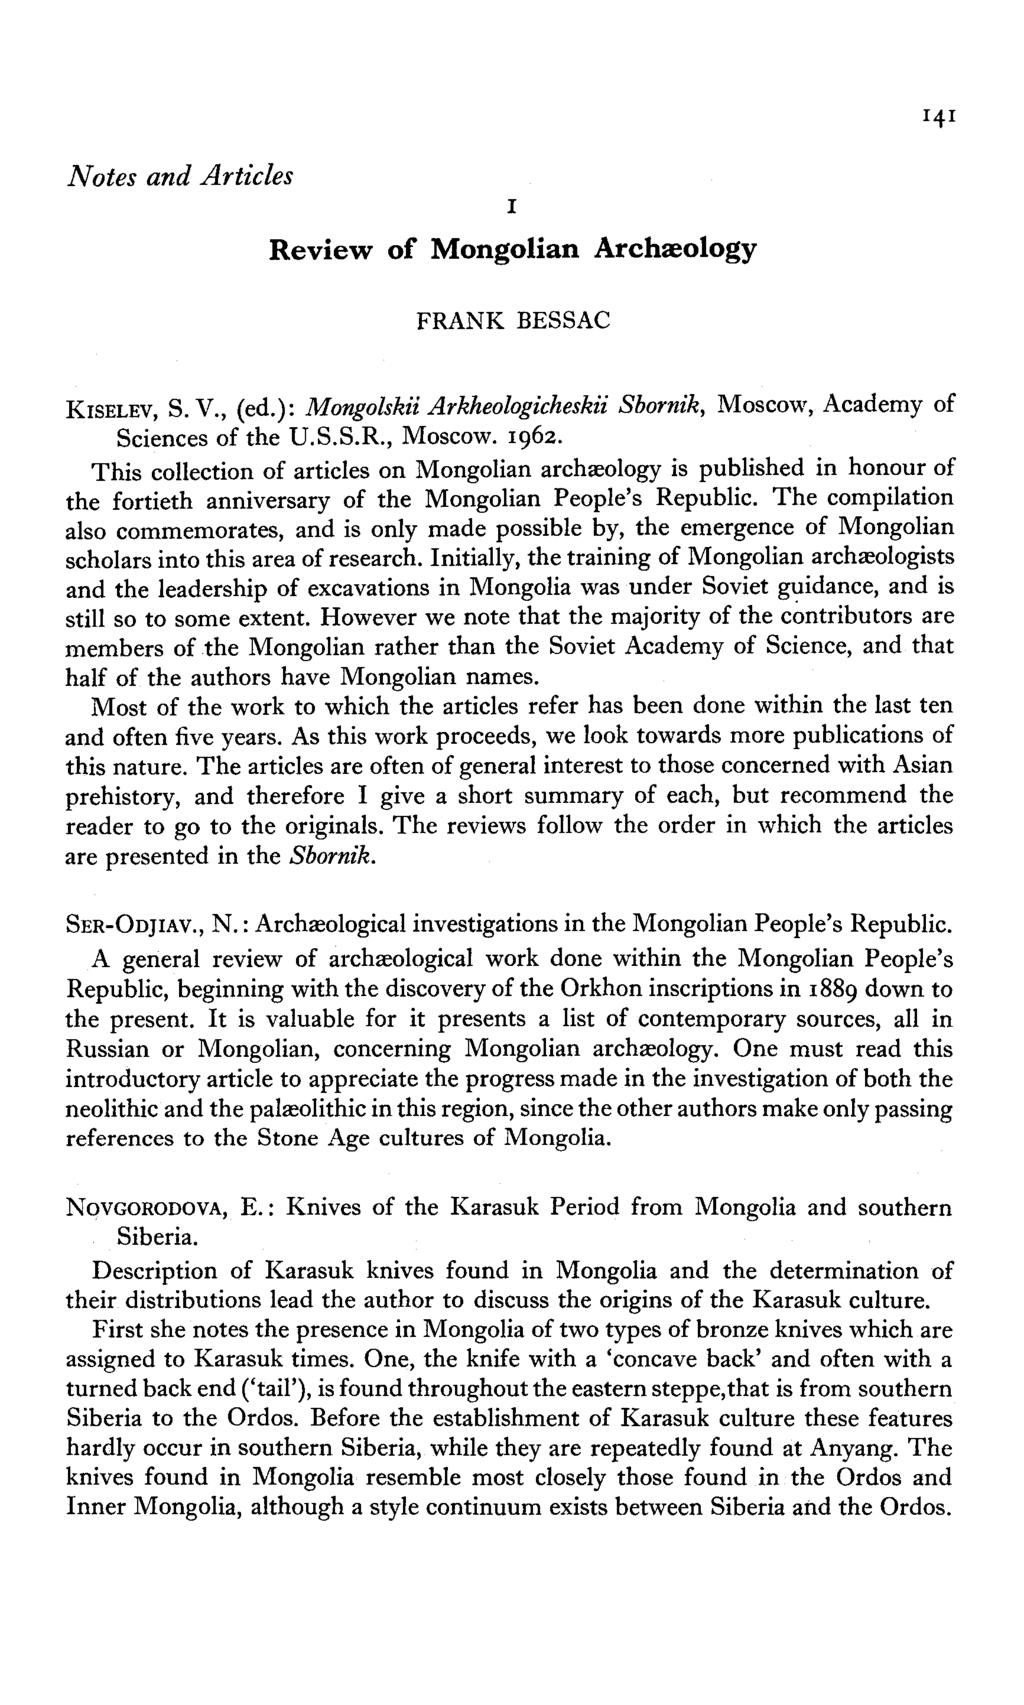 Notes and Articles I Review of Mongolian Archreology FRANK BESSAC KISELEV, S. V., (ed.): Mongolskii Arkheologicheskii Sbornik, Moscow, Academy of Sciences of the U.S.S.R., Moscow. 1962.